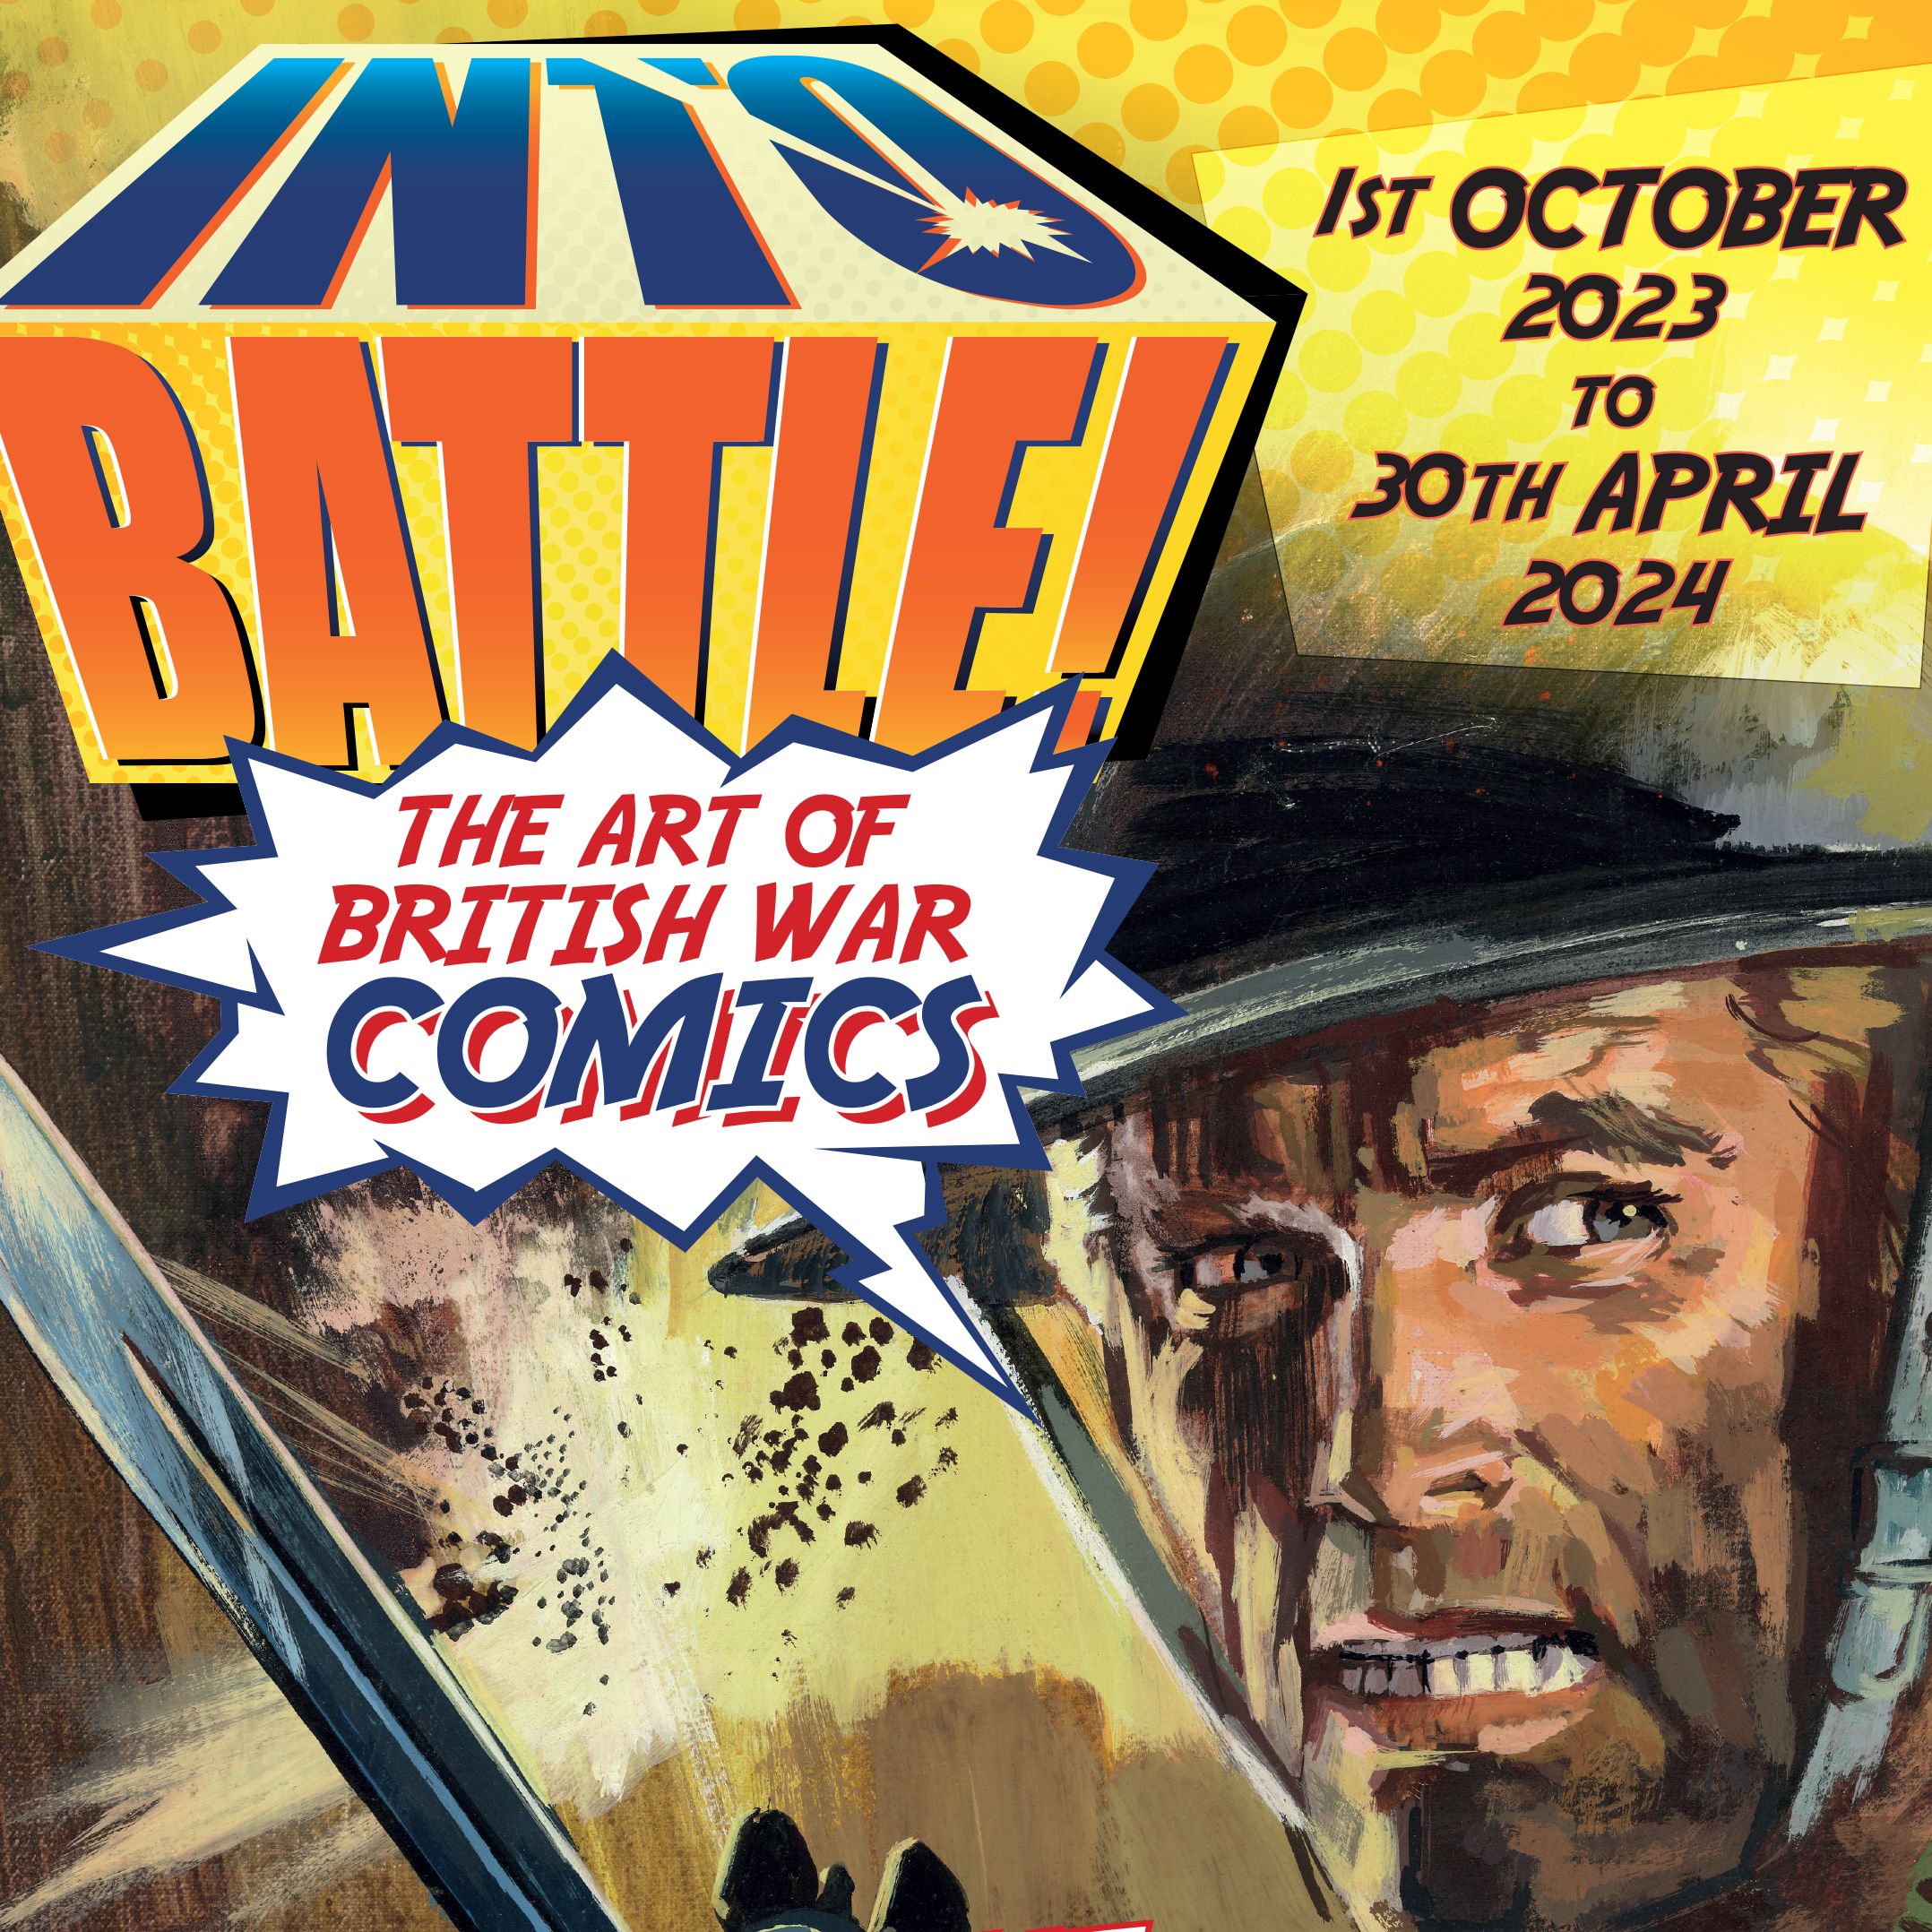 ‘Into Battle’ exhibition to showcase the best of British war comics